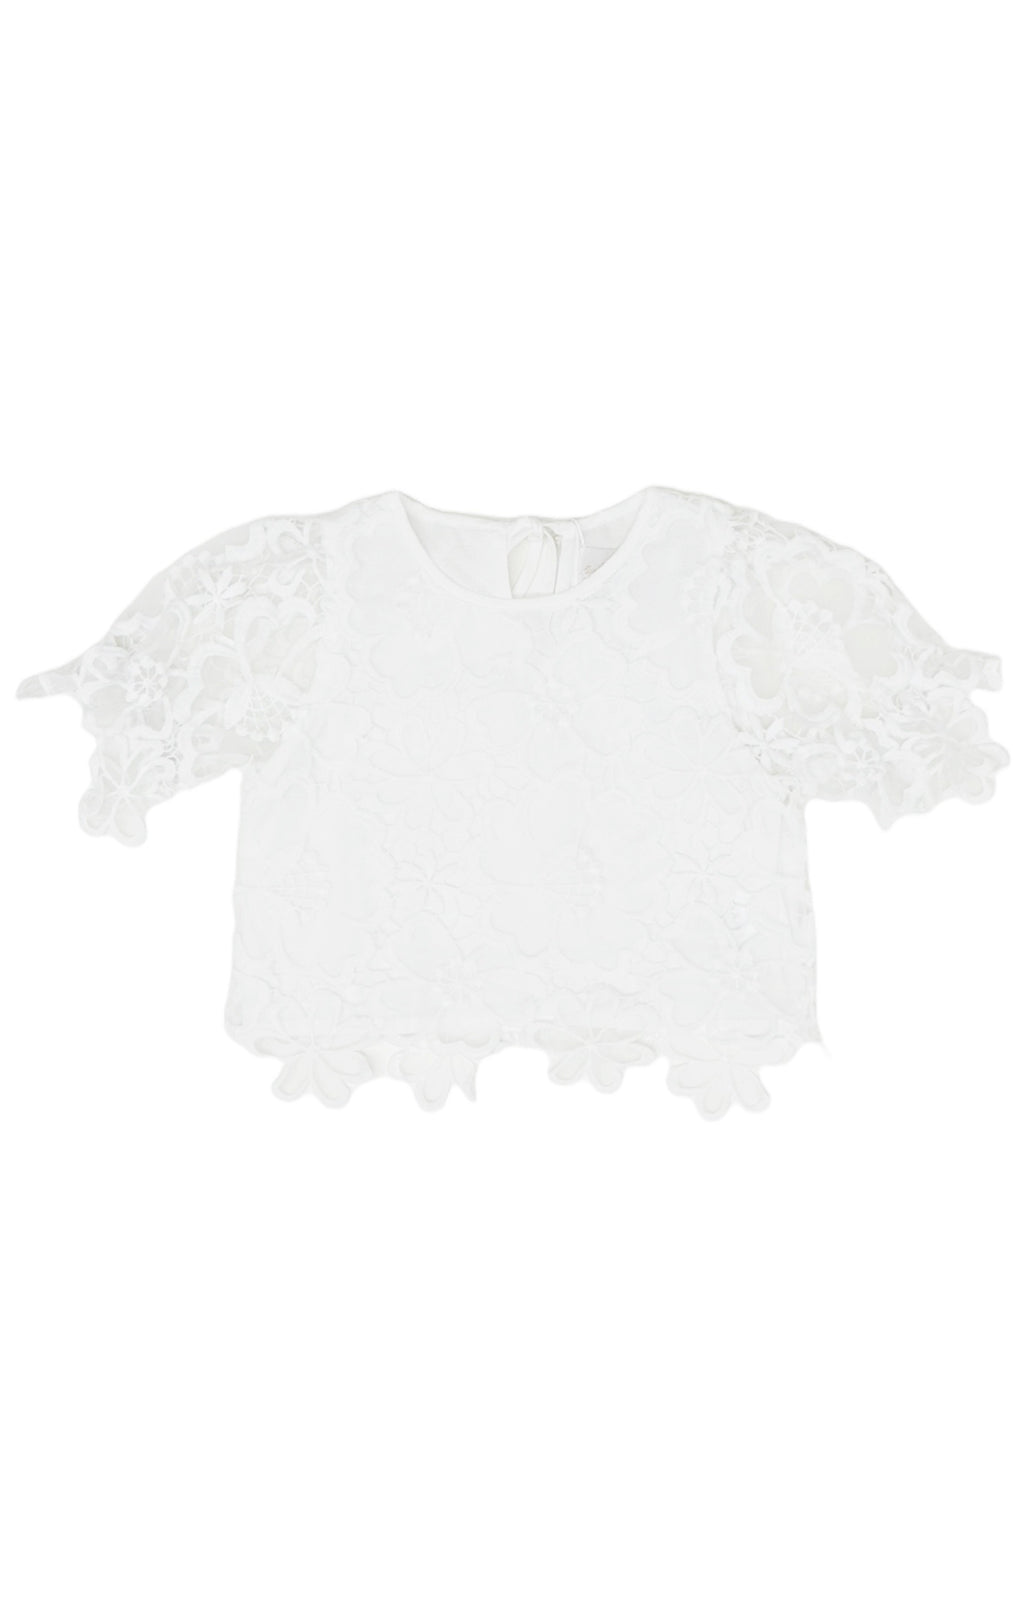 PETITE AMALIE (NEW) with tags Top Size: 4 Years